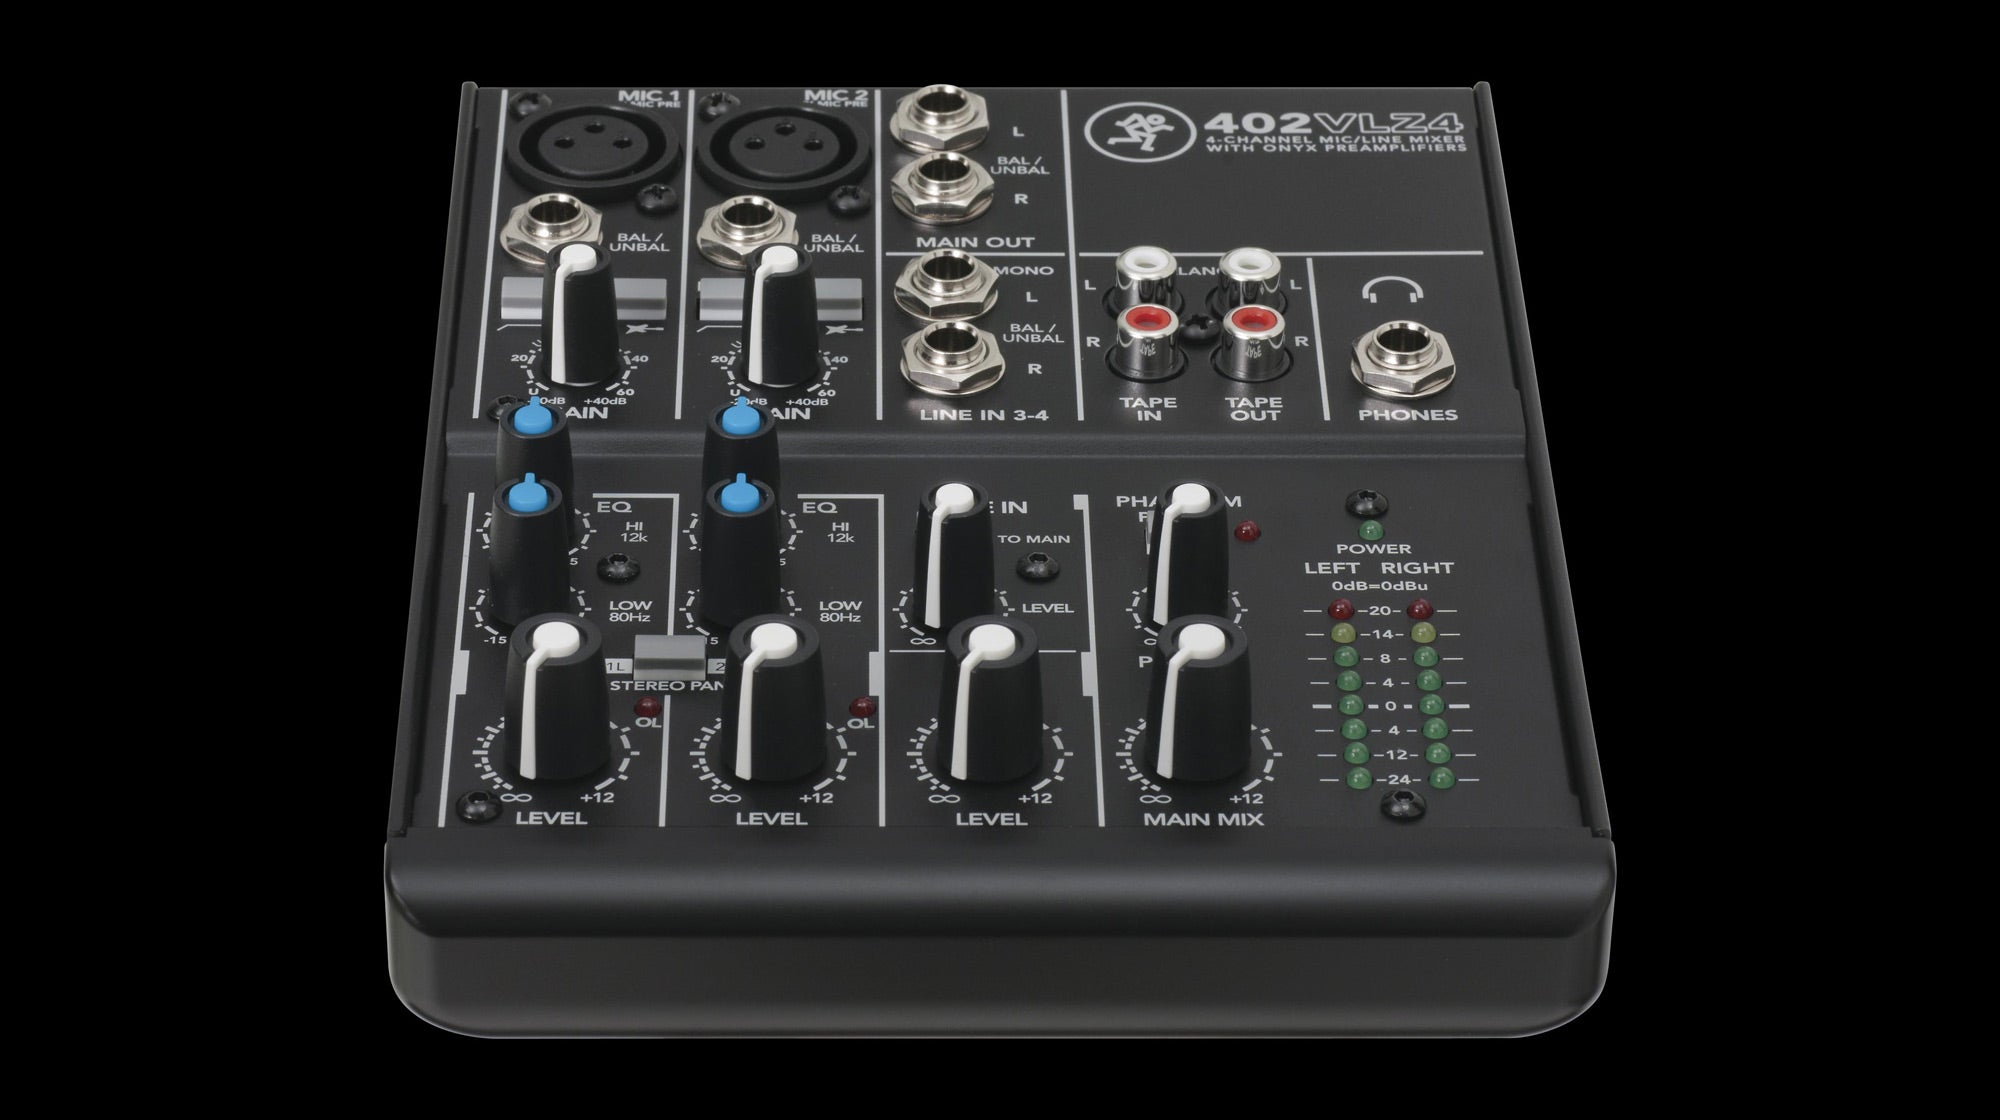 Mackie 402VLZ4 4 Channel Ultra Compact Mixer